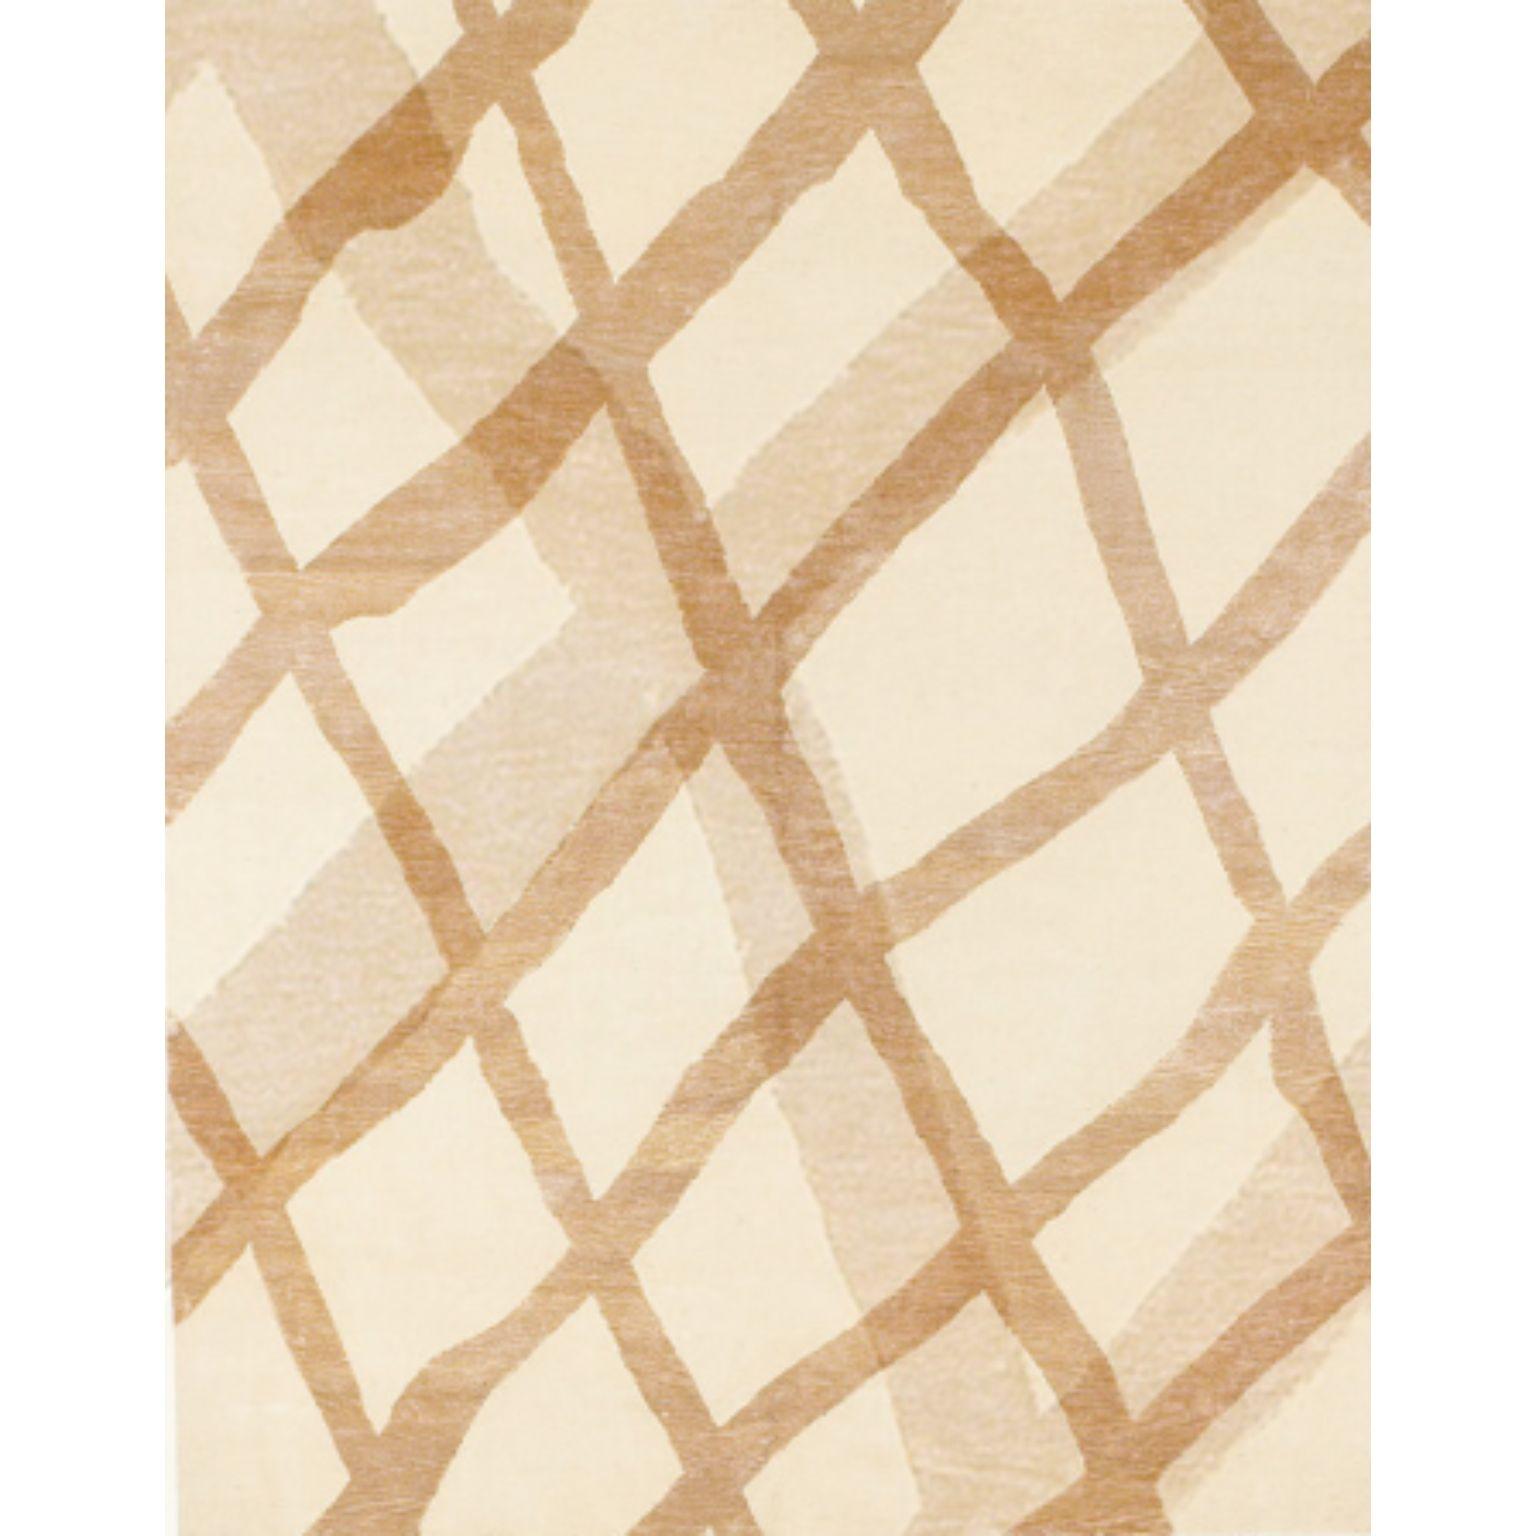 BLOCKS rug by Illulian
Dimensions: D300 x H200 cm 
Materials: Wool 50%, Silk 50%
Variations available and prices may vary according to materials and sizes.

Illulian, historic and prestigious rug company brand, internationally renowned in the